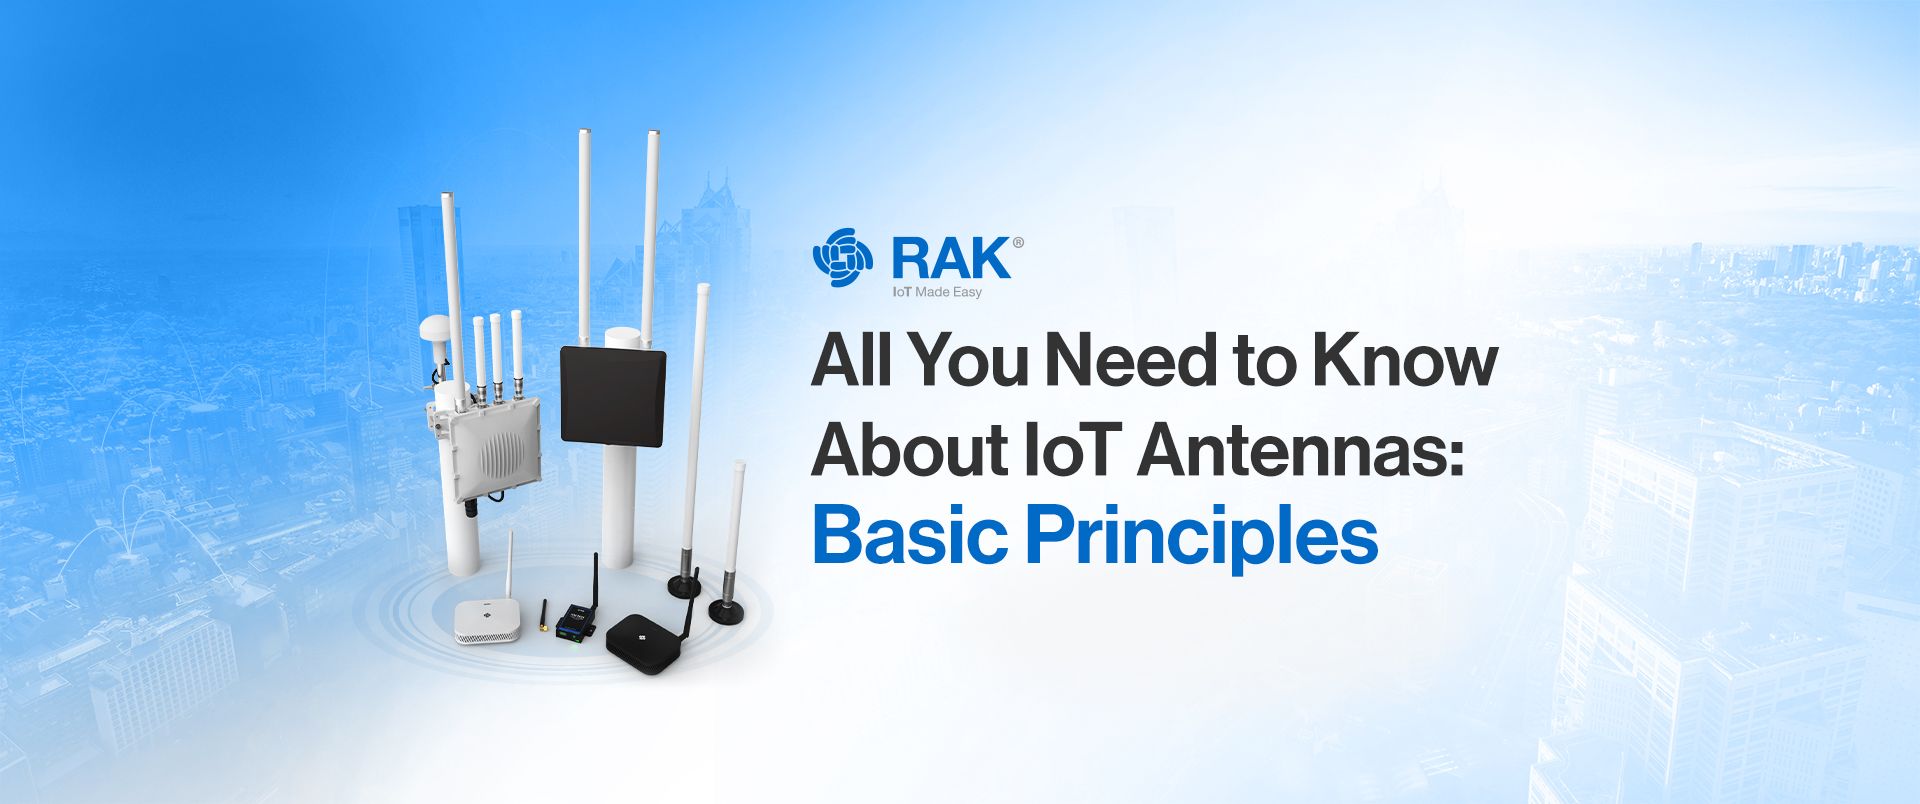 All You Need to Know About IoT Antennas: Basic Principles